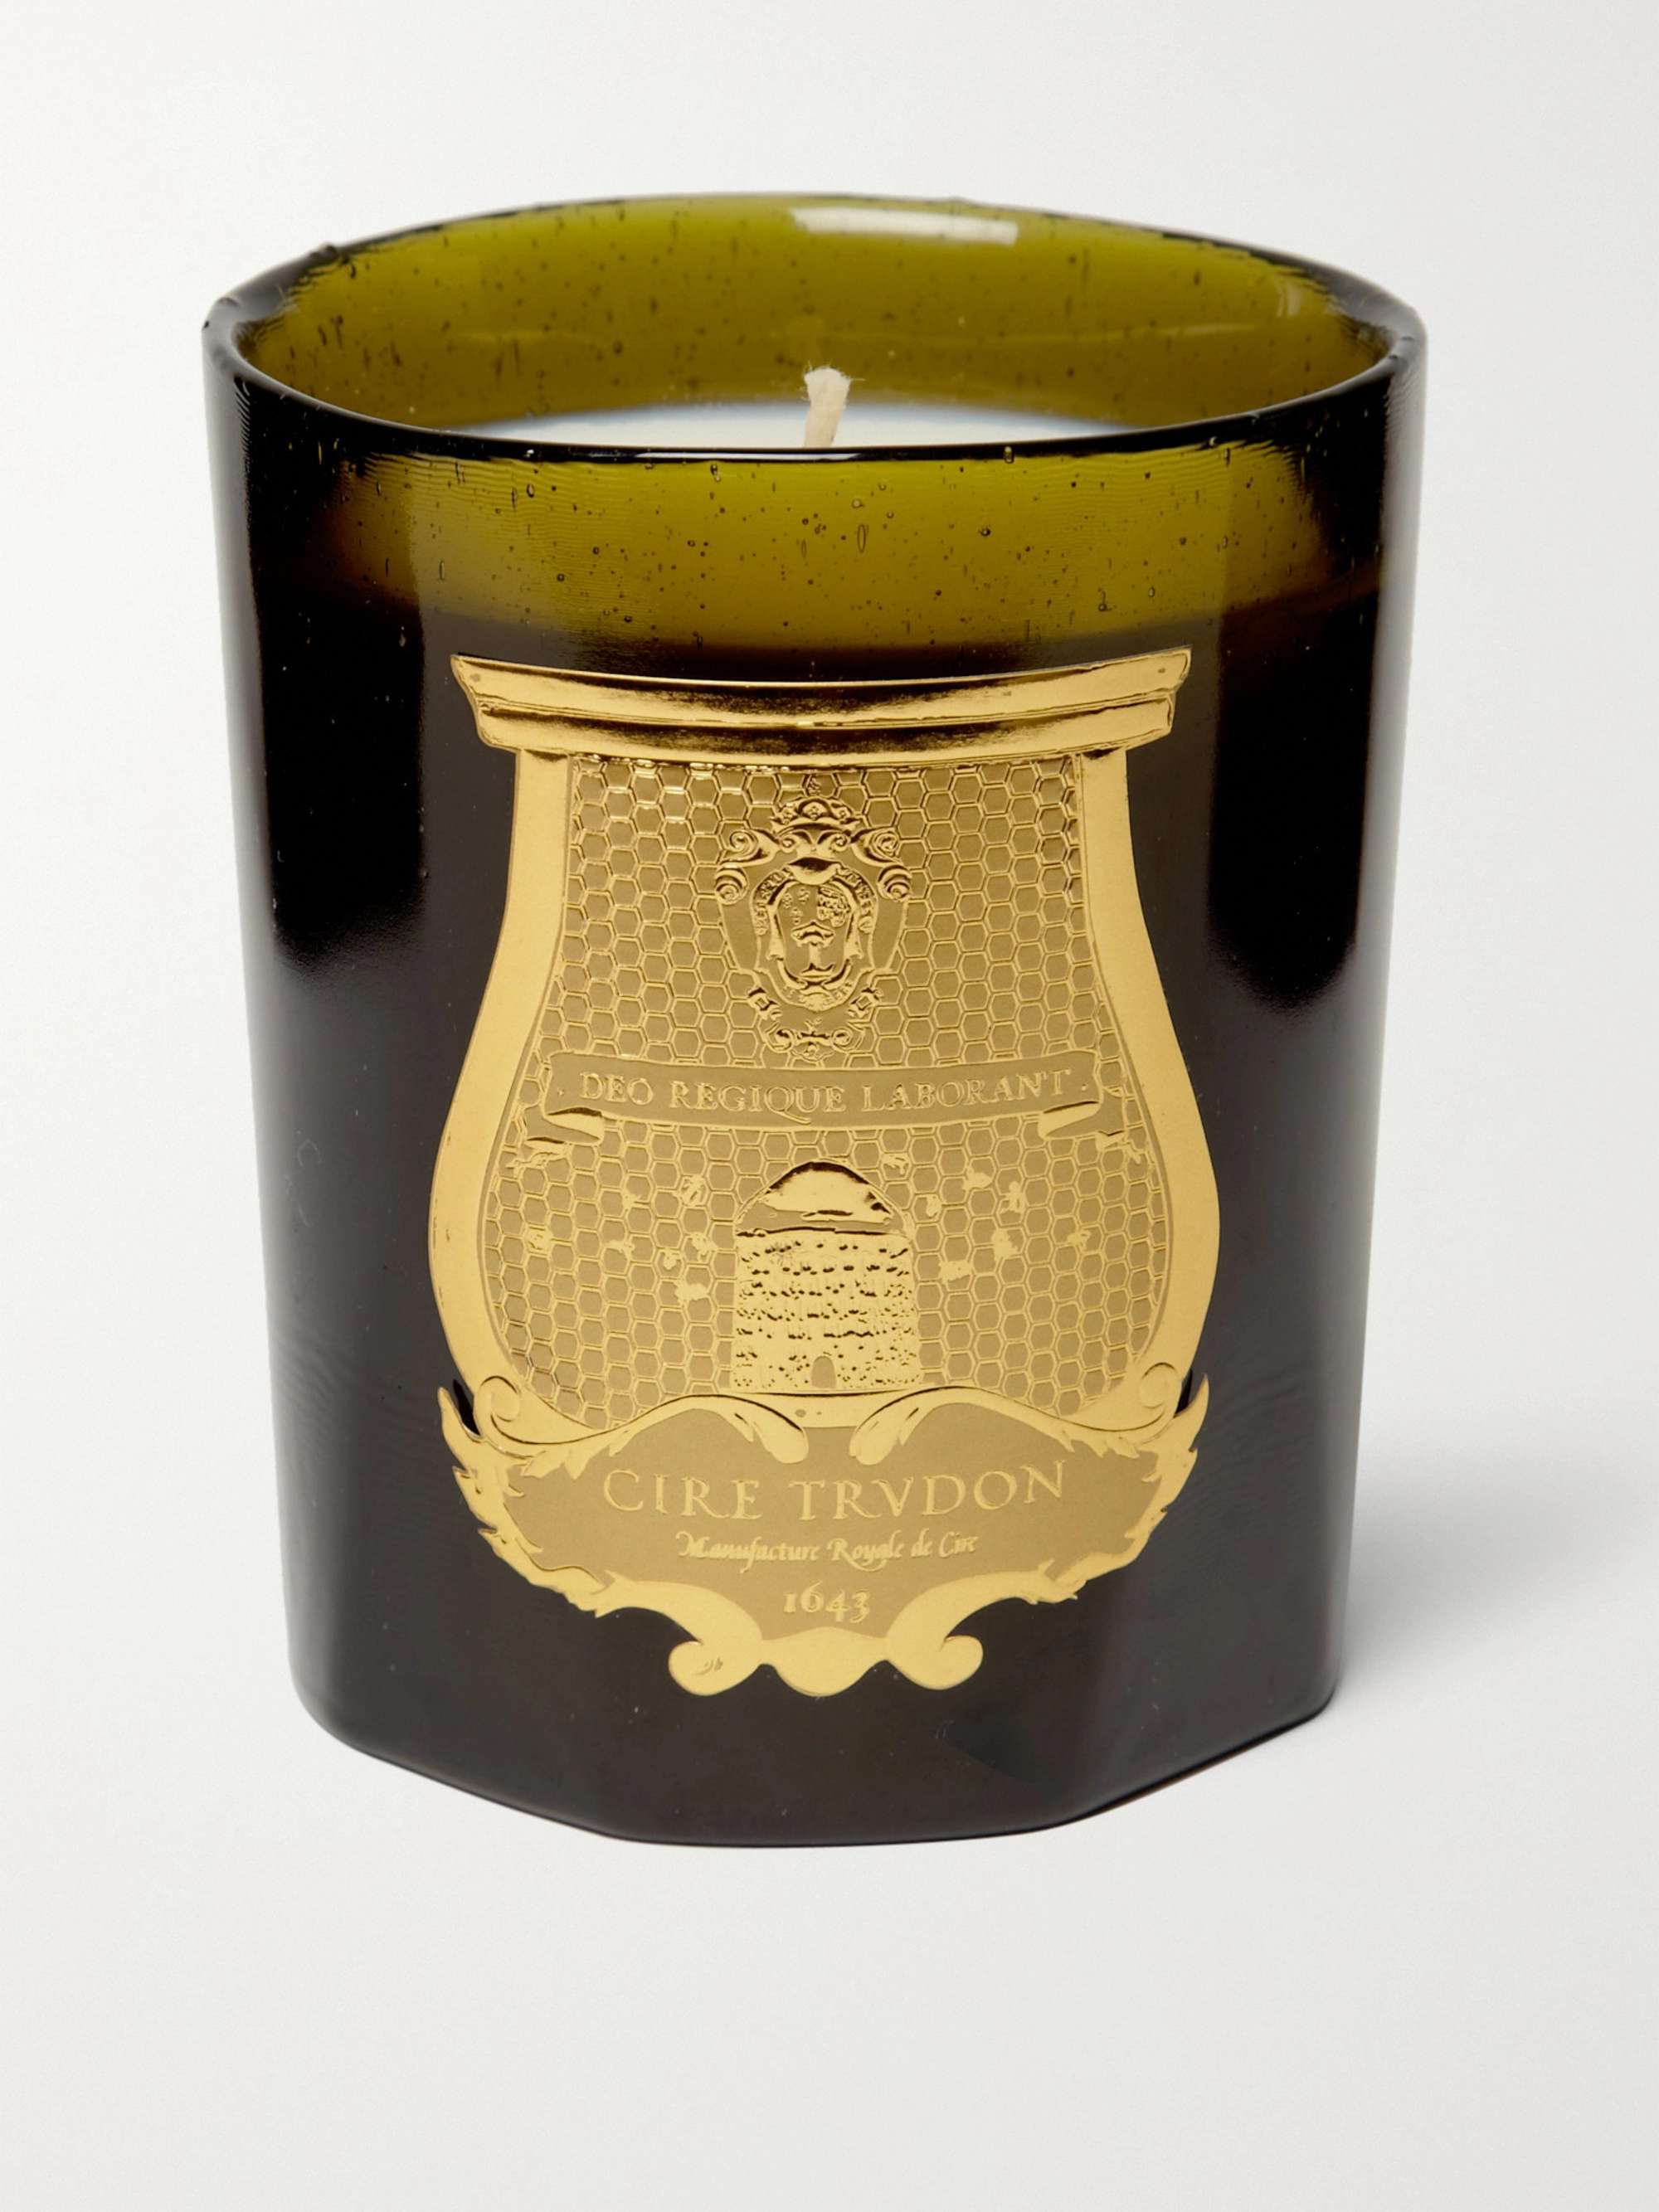 CIRE TRUDON Solis Rex Scented Candle, 270g